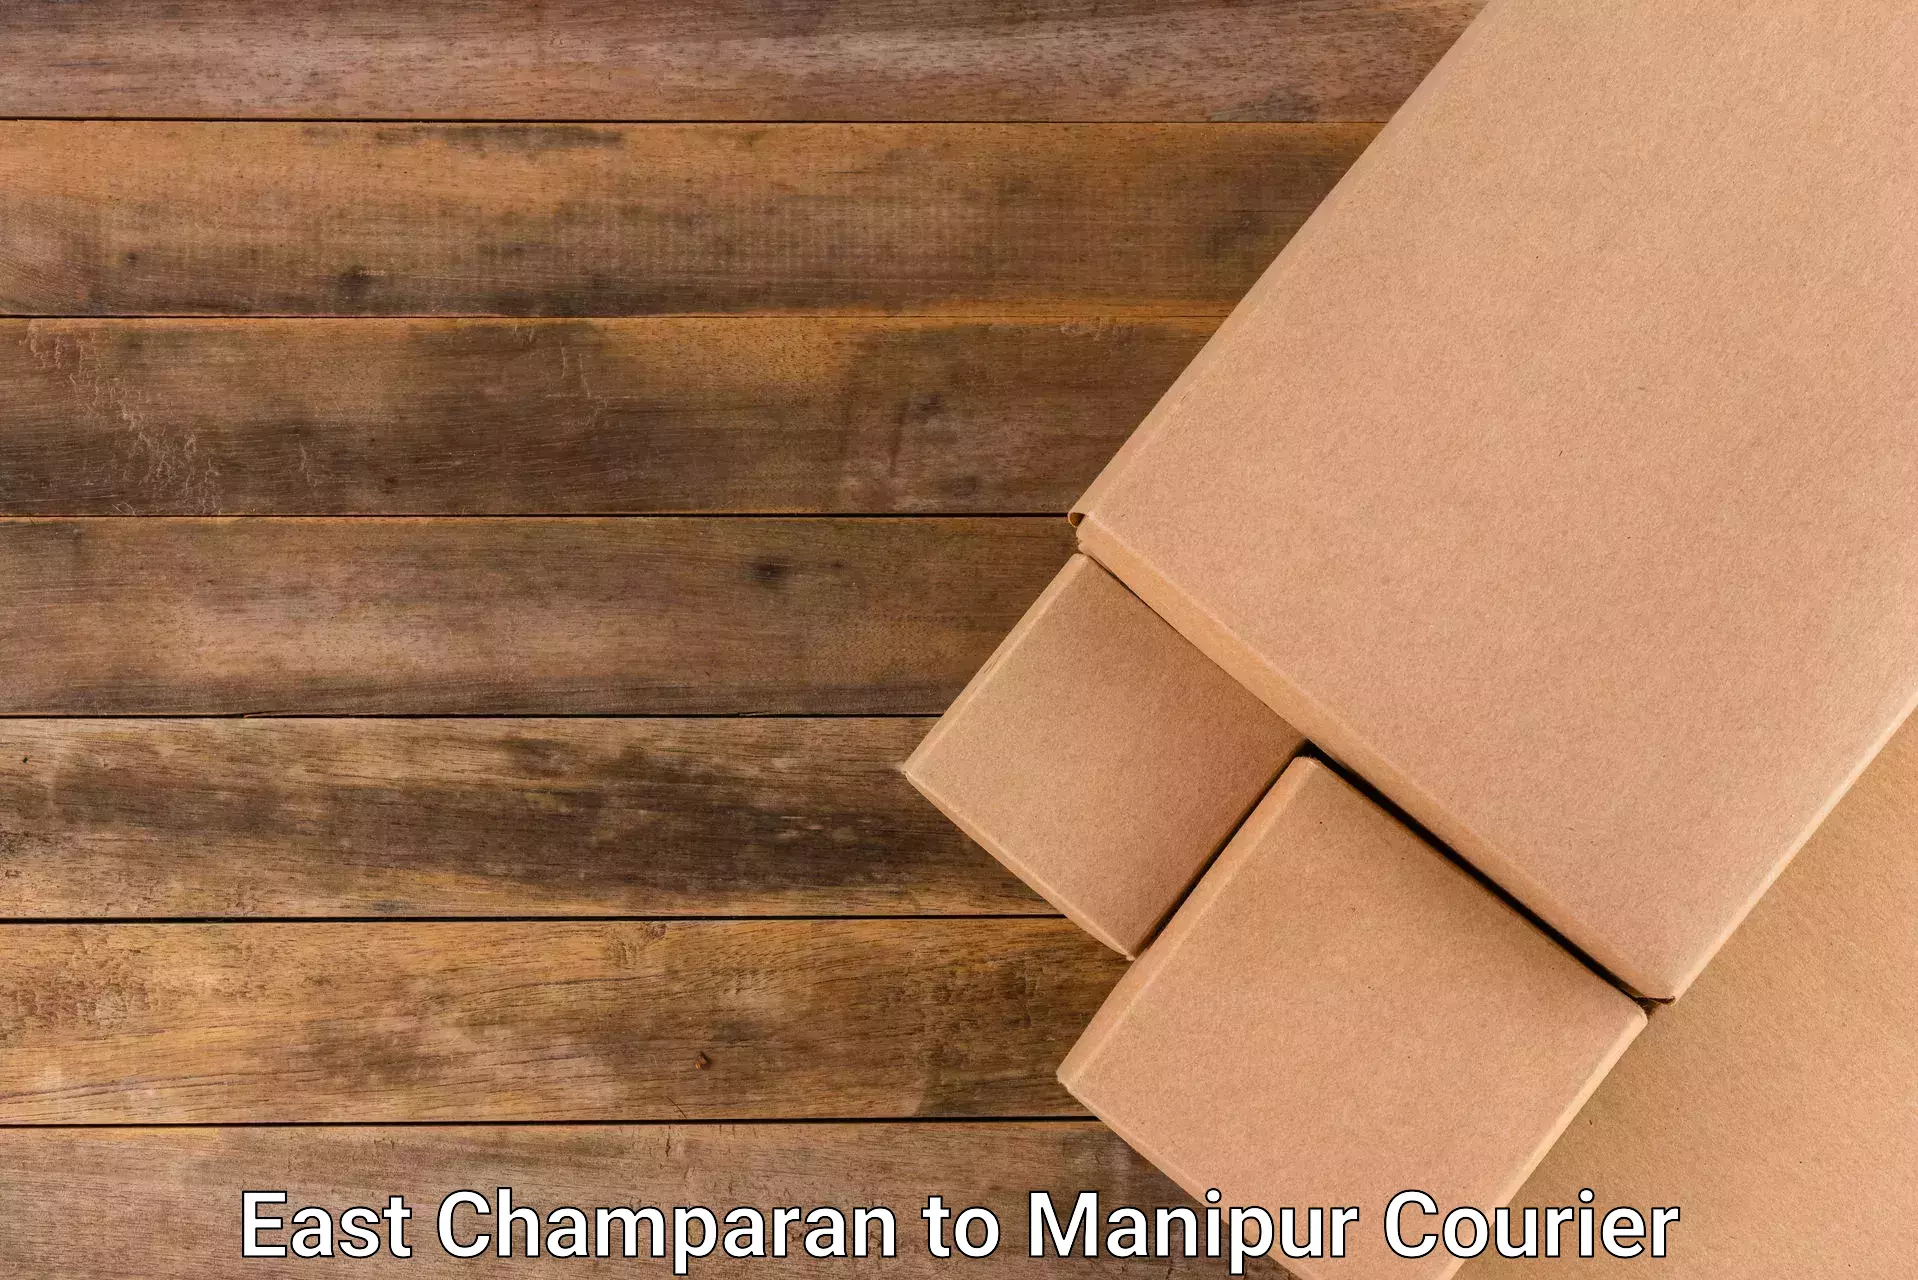 Holiday shipping services East Champaran to Manipur